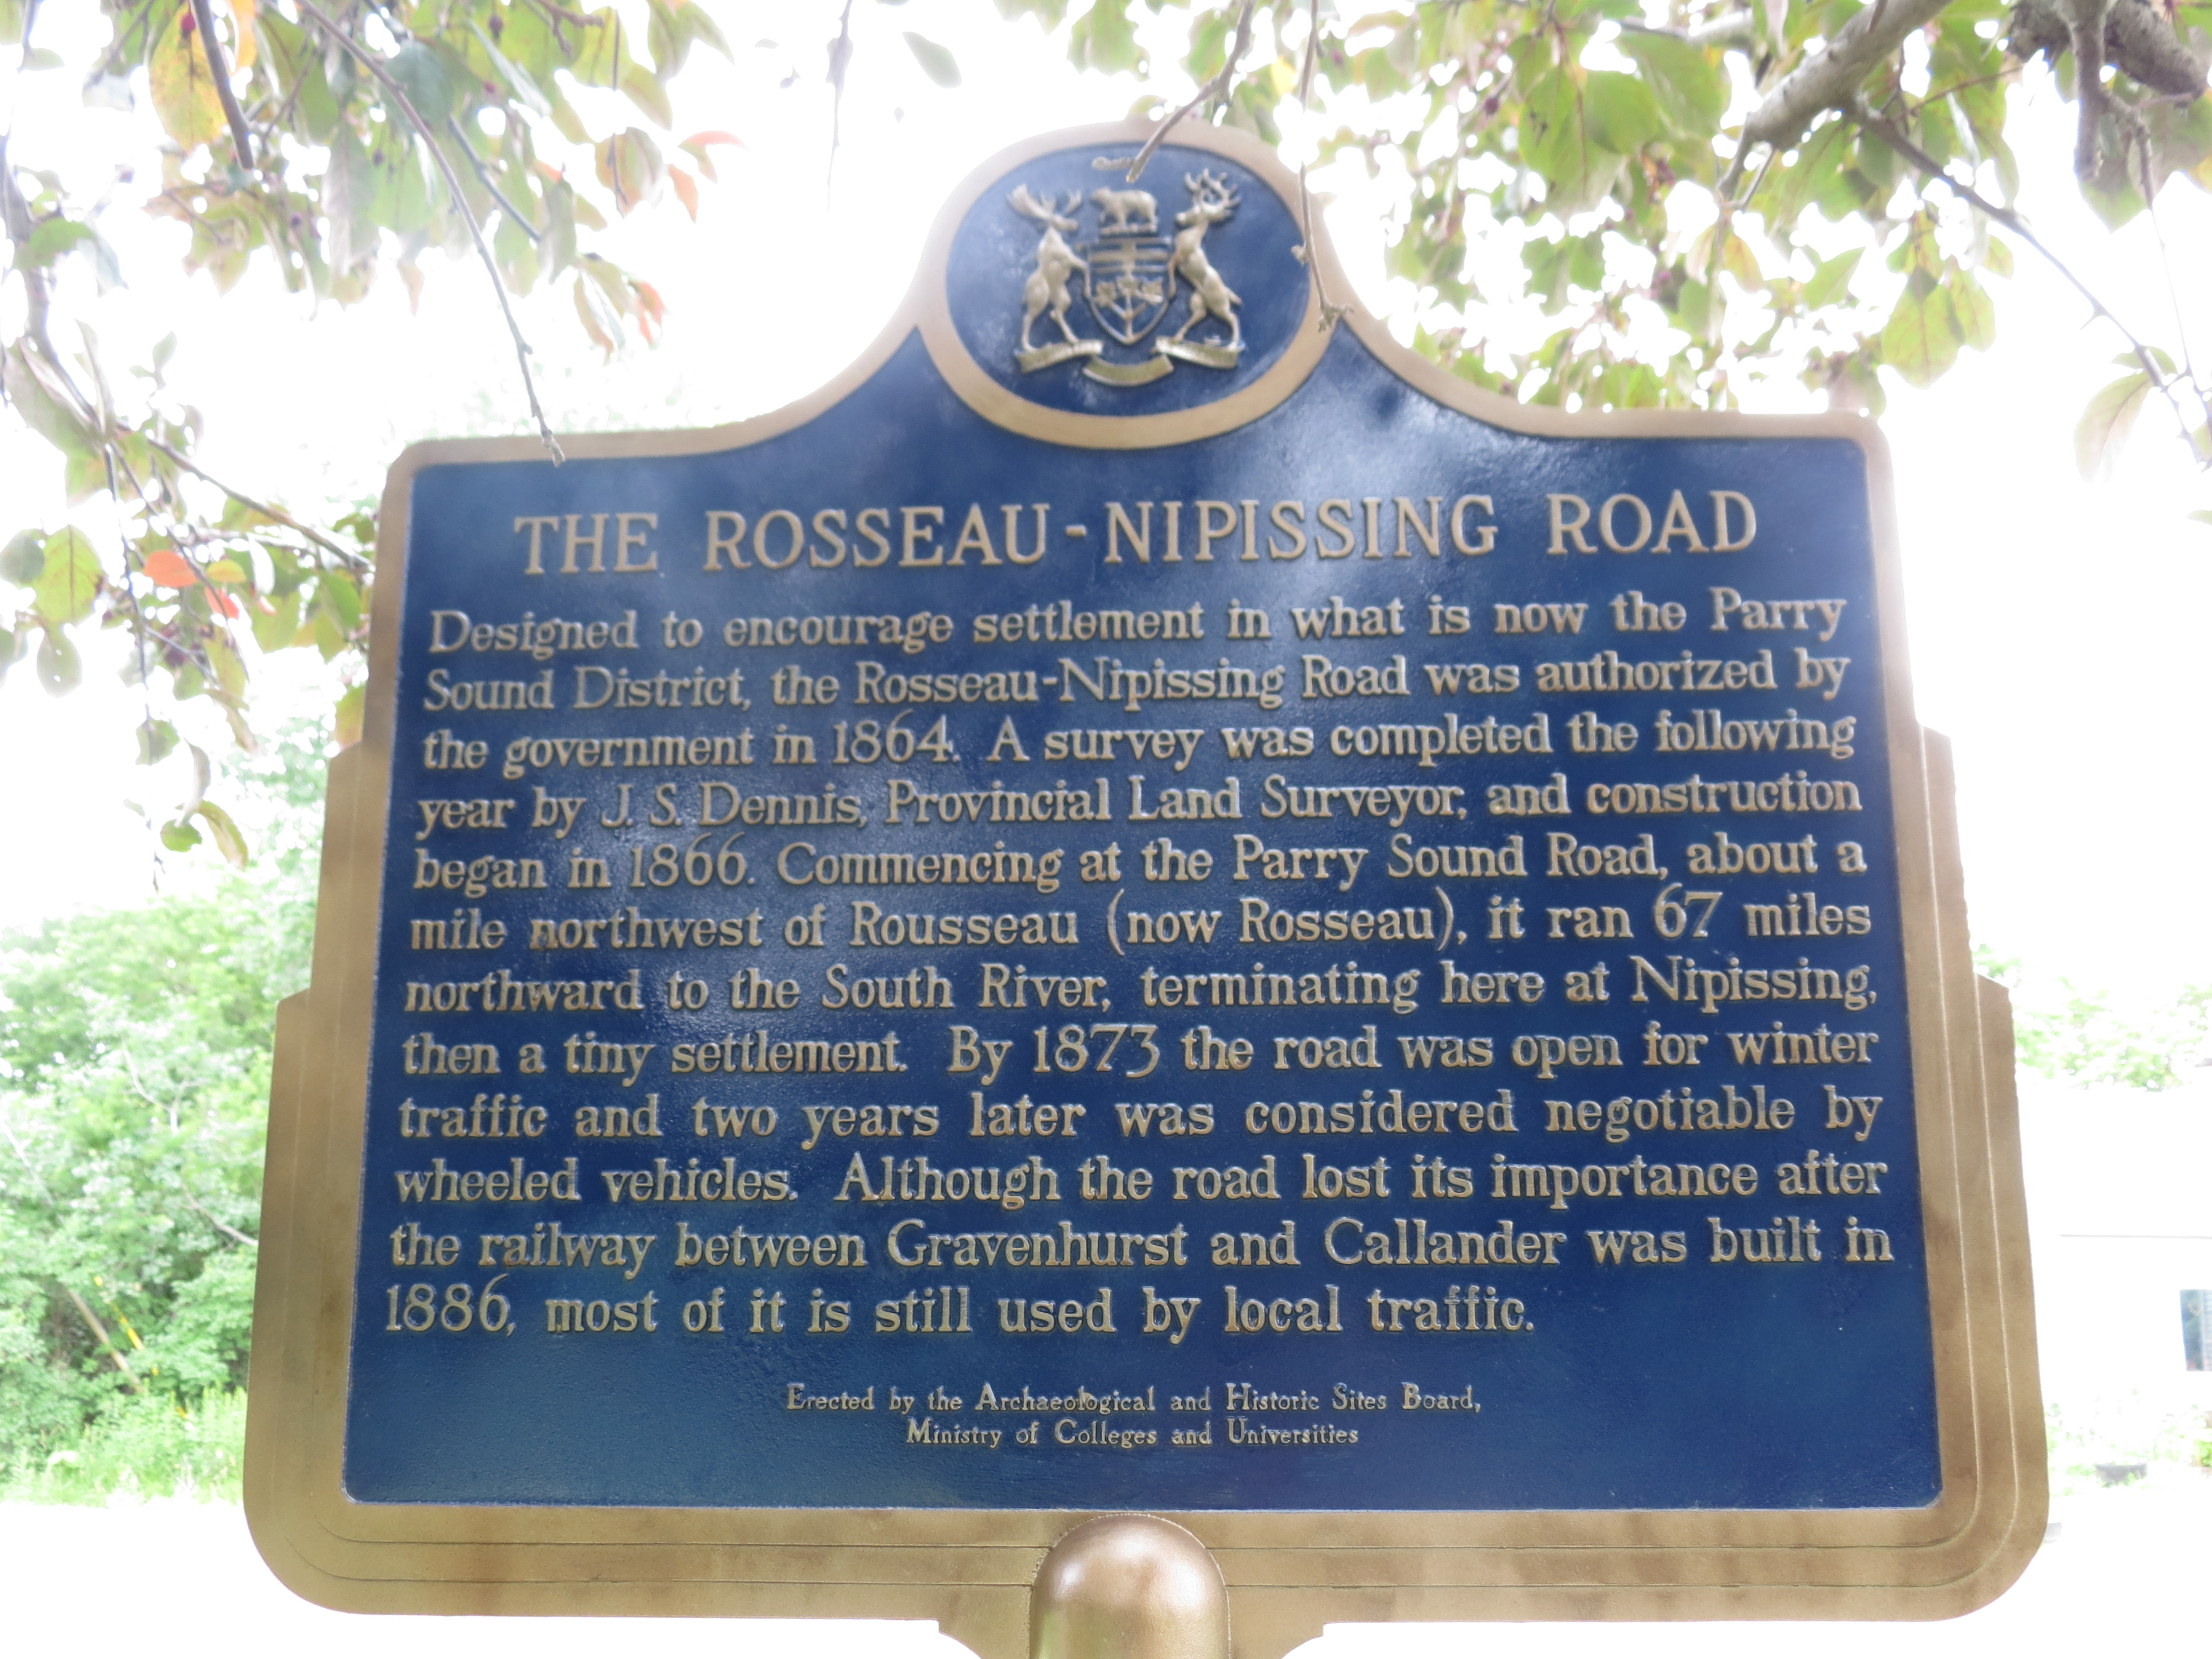 A blue and gold commemorative sign describing the authorization and construction of the Rosseau-Nipissing Road, with green foliage and sunlight in the background.